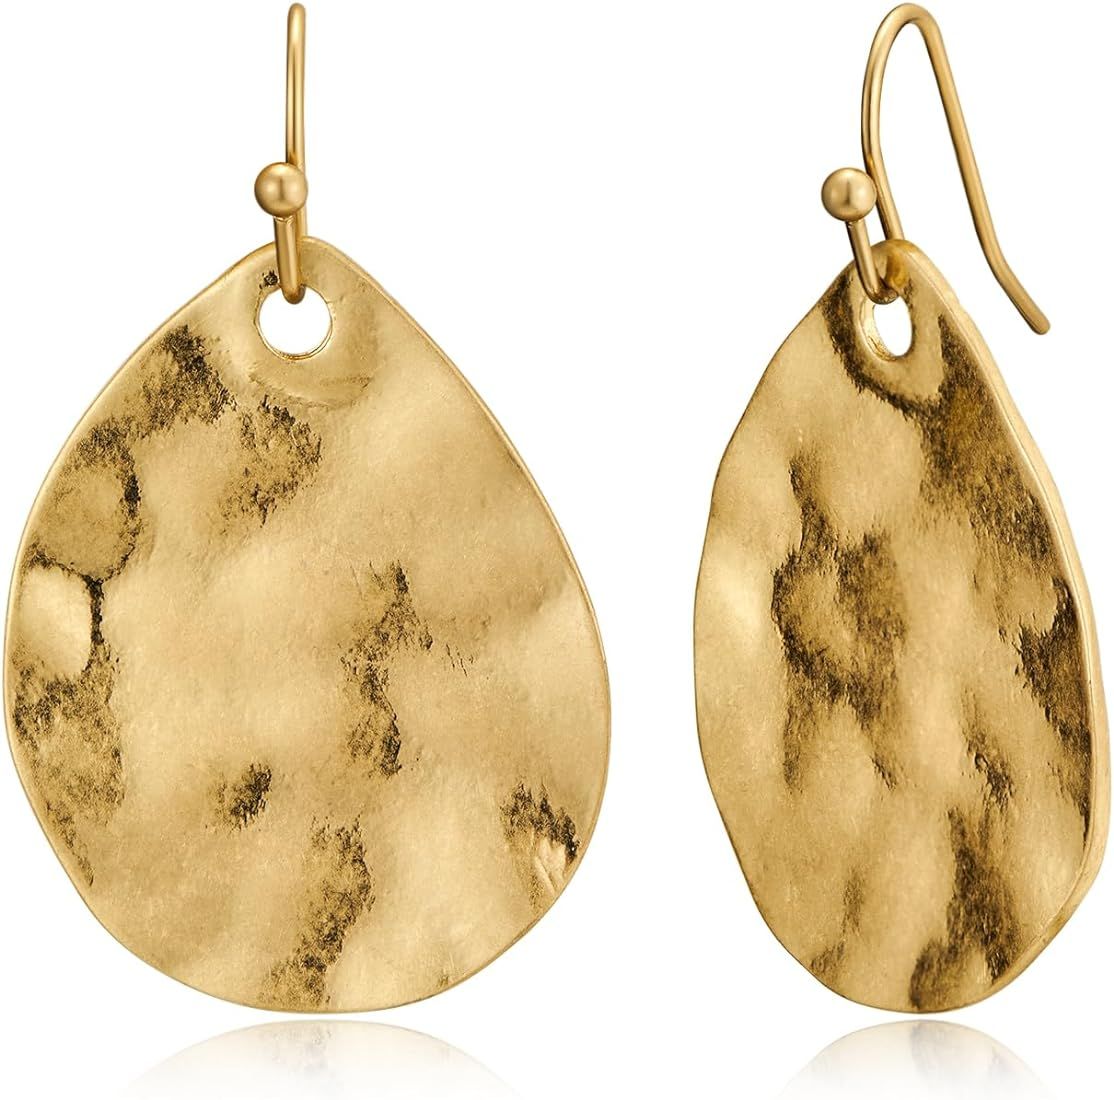 INNERDIVA Antique Gold Hammered Disc Drop Earrings Boho Earrings with Two Tone Jewelry Gift | Amazon (US)